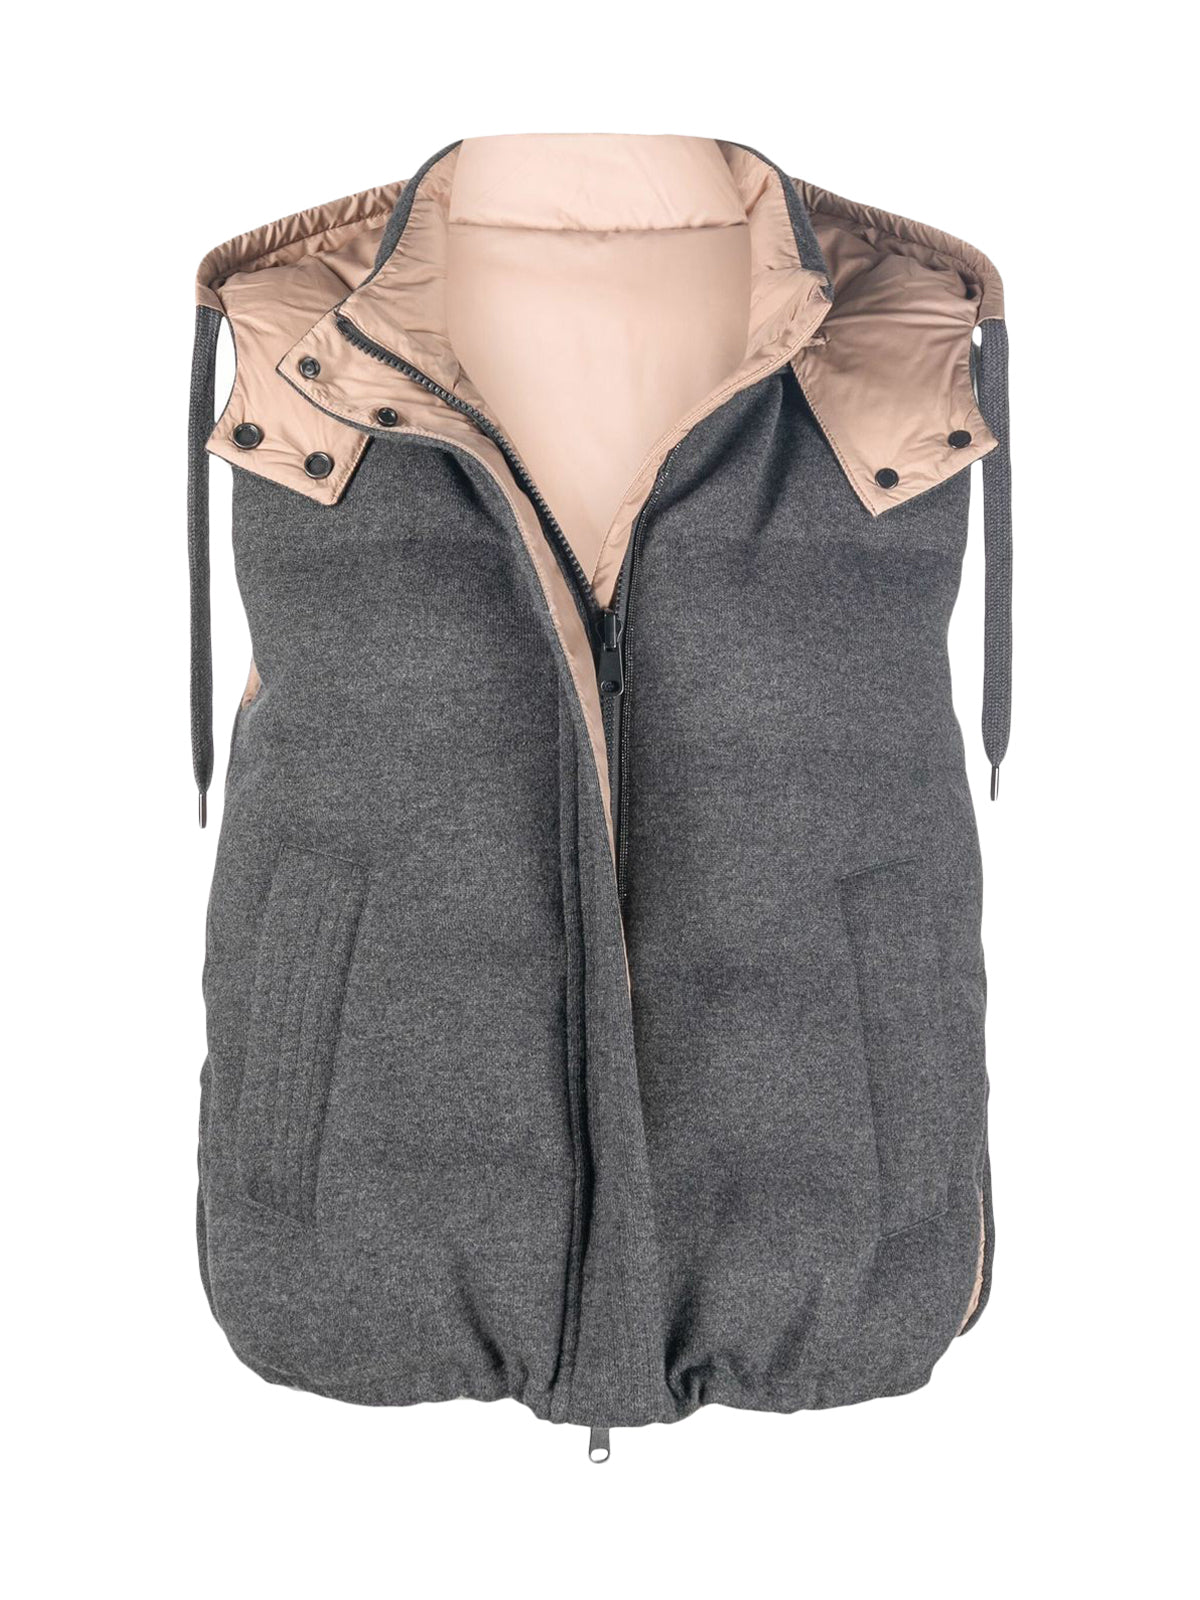 Reversible sleeveless down jacket in cashmere knit with hood and "Shiny Trim"